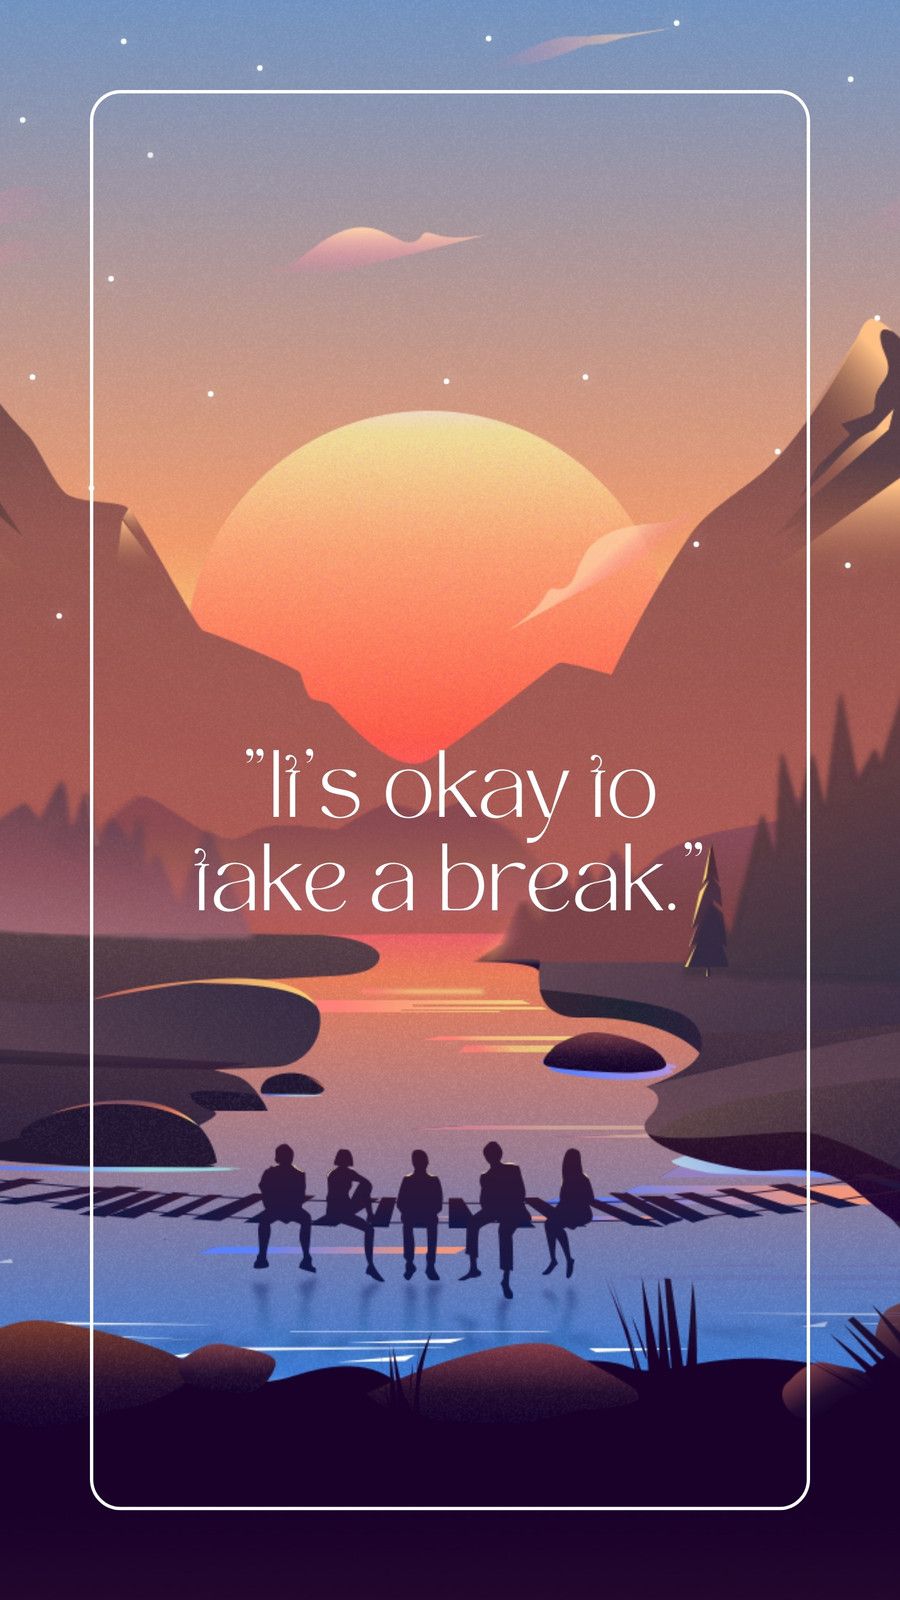 A minimalist landscape illustration of a group of people sitting by a lake at sunset with the text 